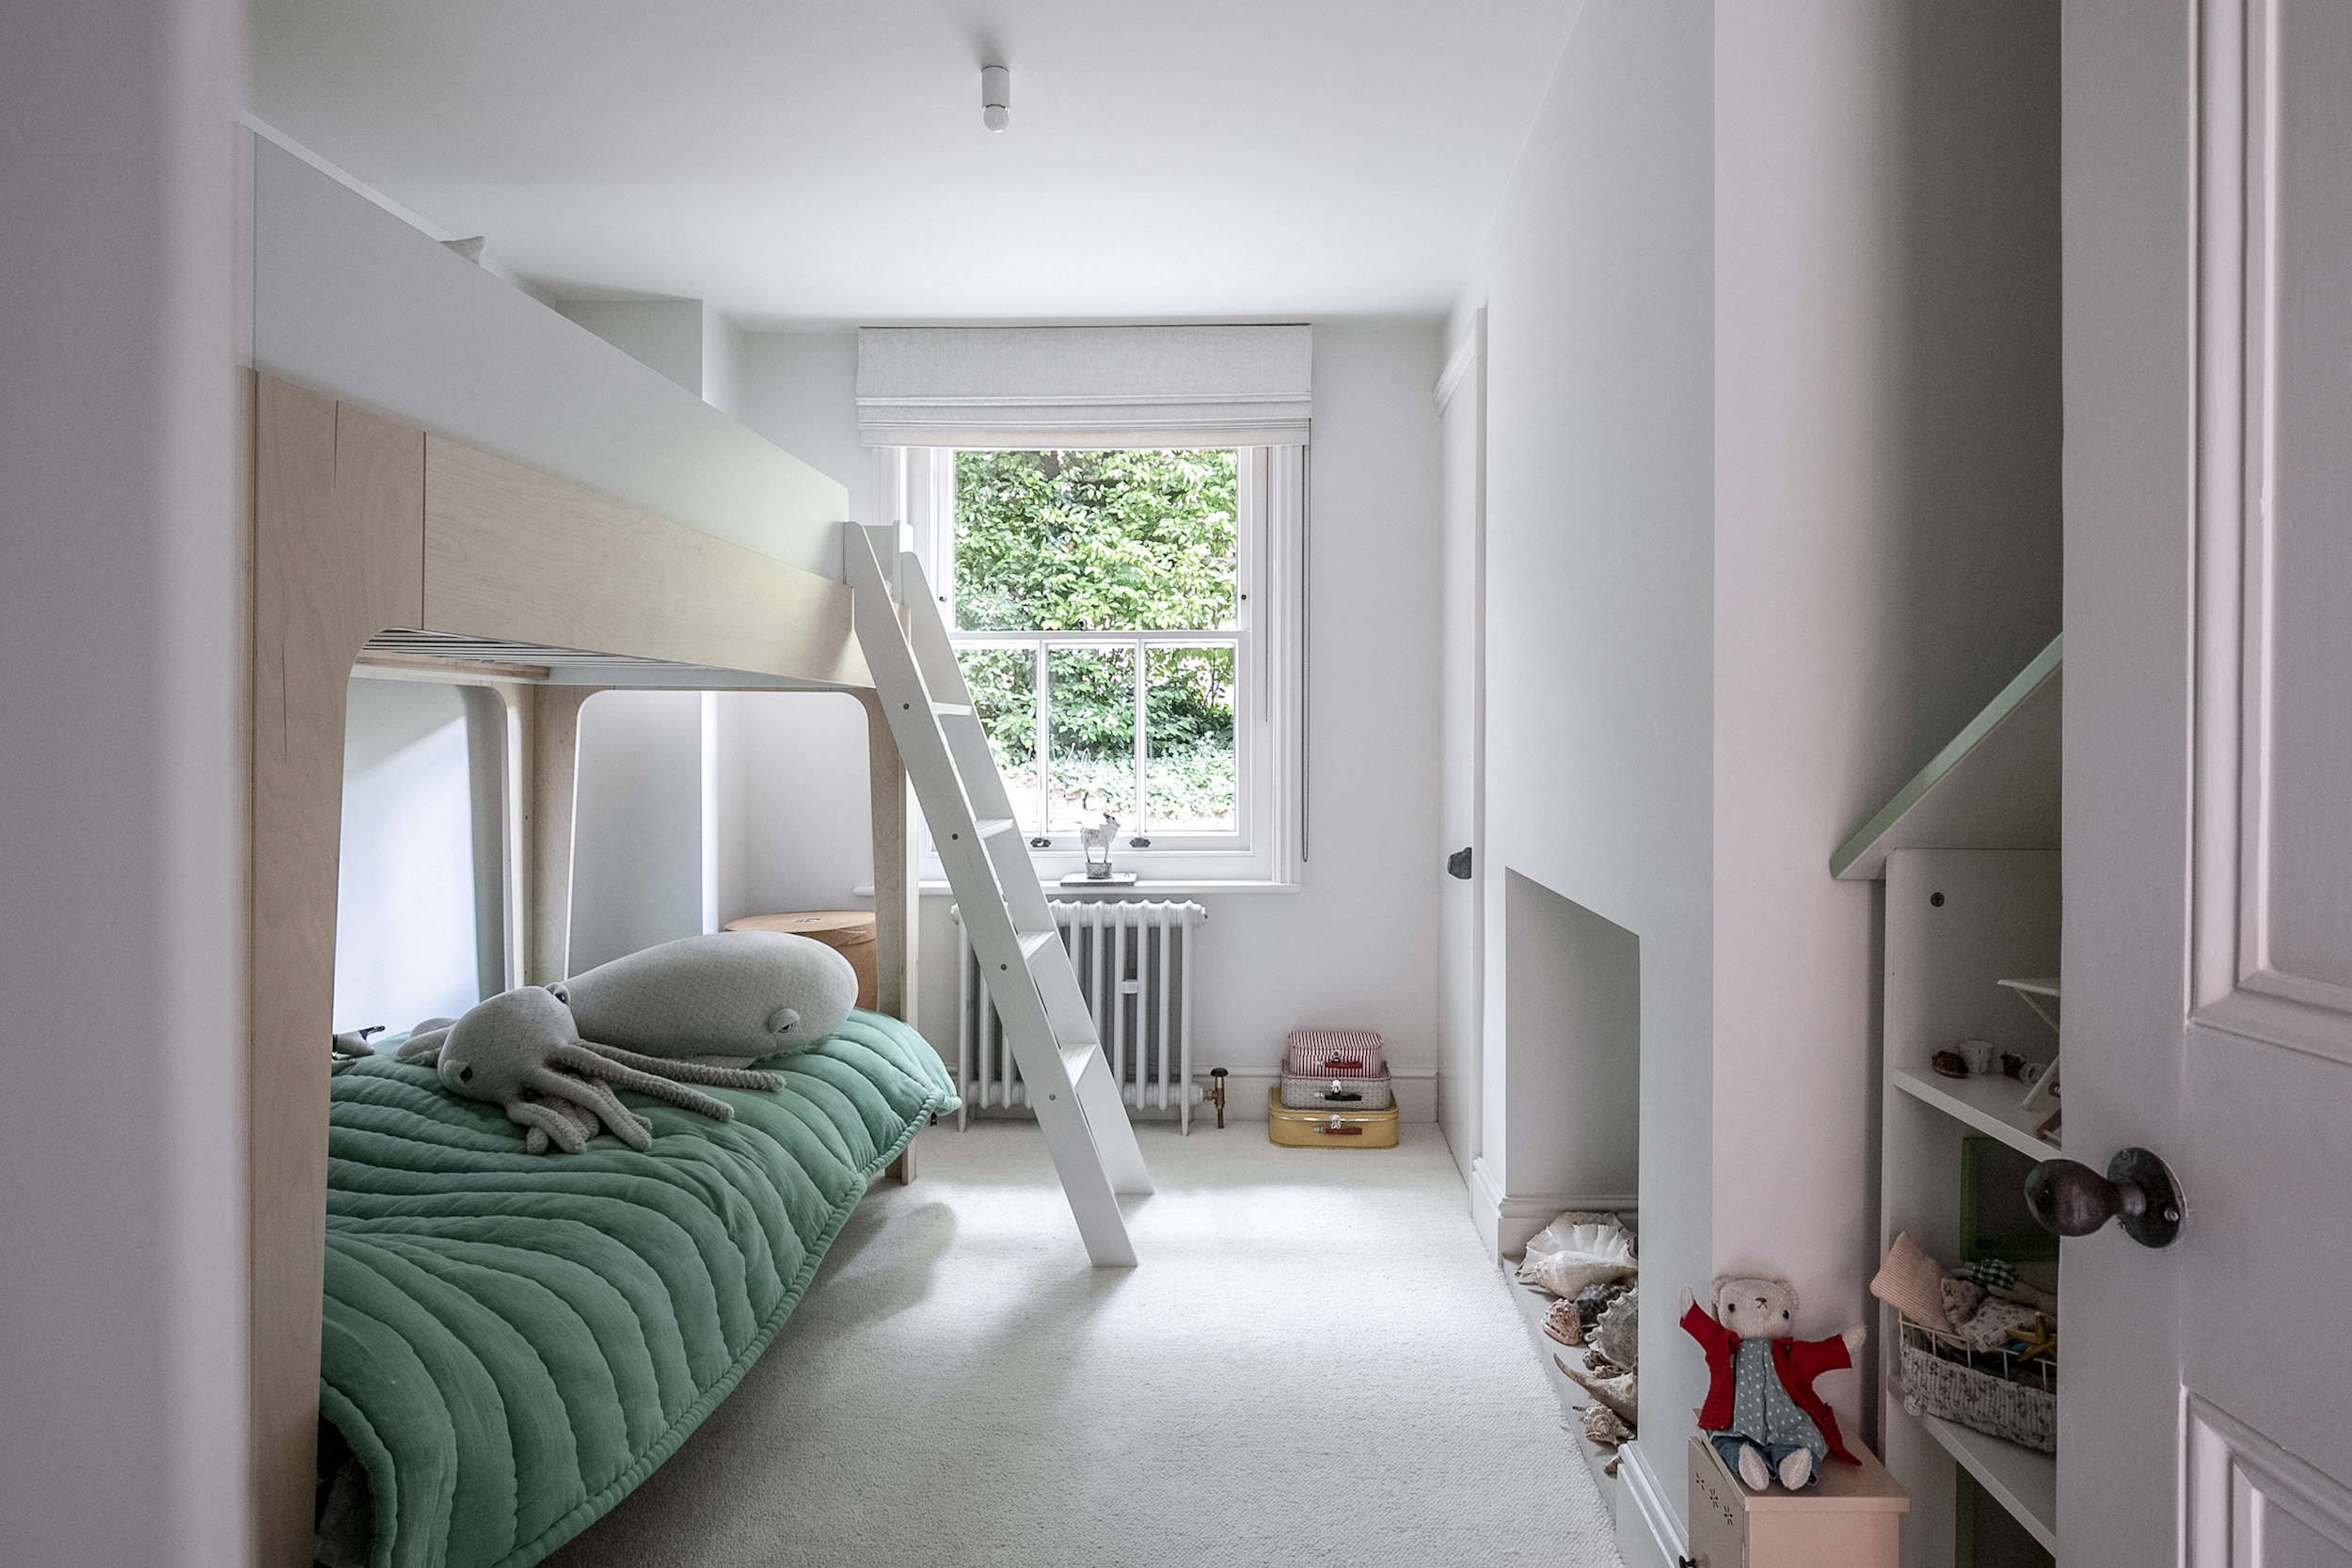 Steal This Look: Minimalist Kids' Rooms Courtesy of Faye Toogood - Remodelista